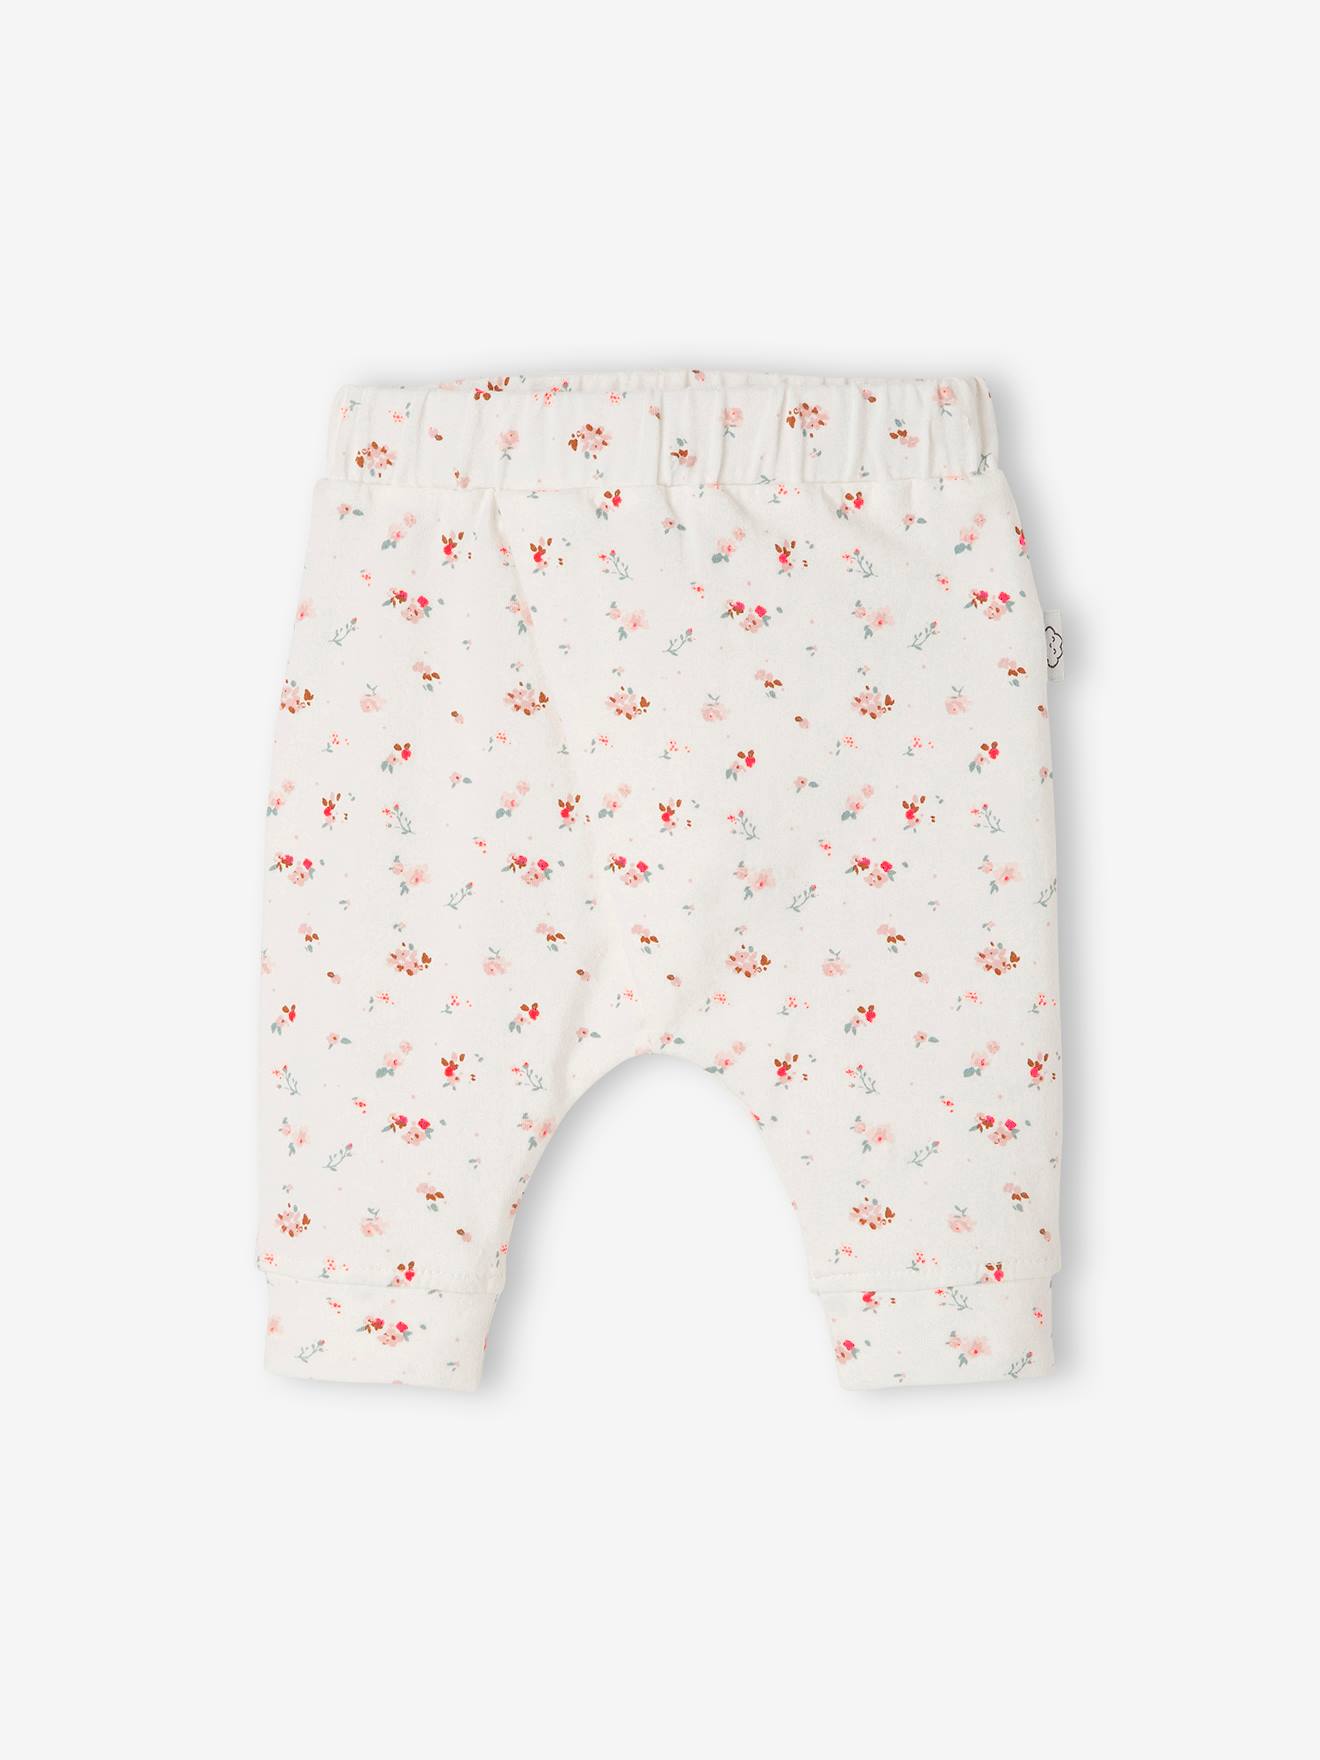 Soft Jersey Knit Trousers for Newborn Babies white light solid 2